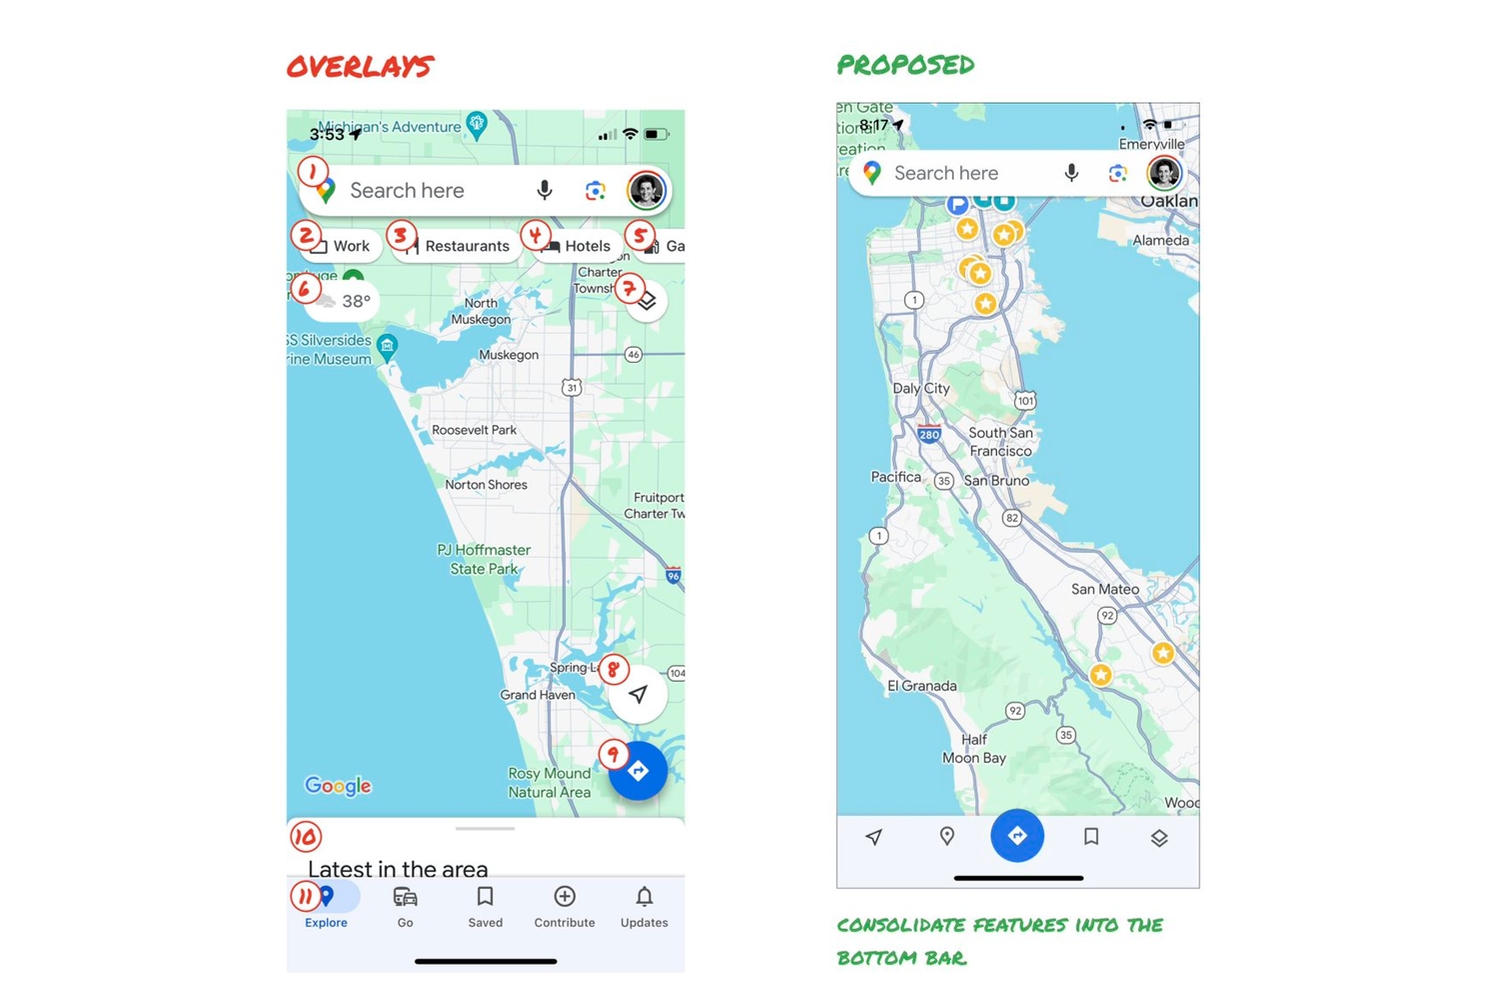 Comparison of existing Google Maps redesign and proposed new design.